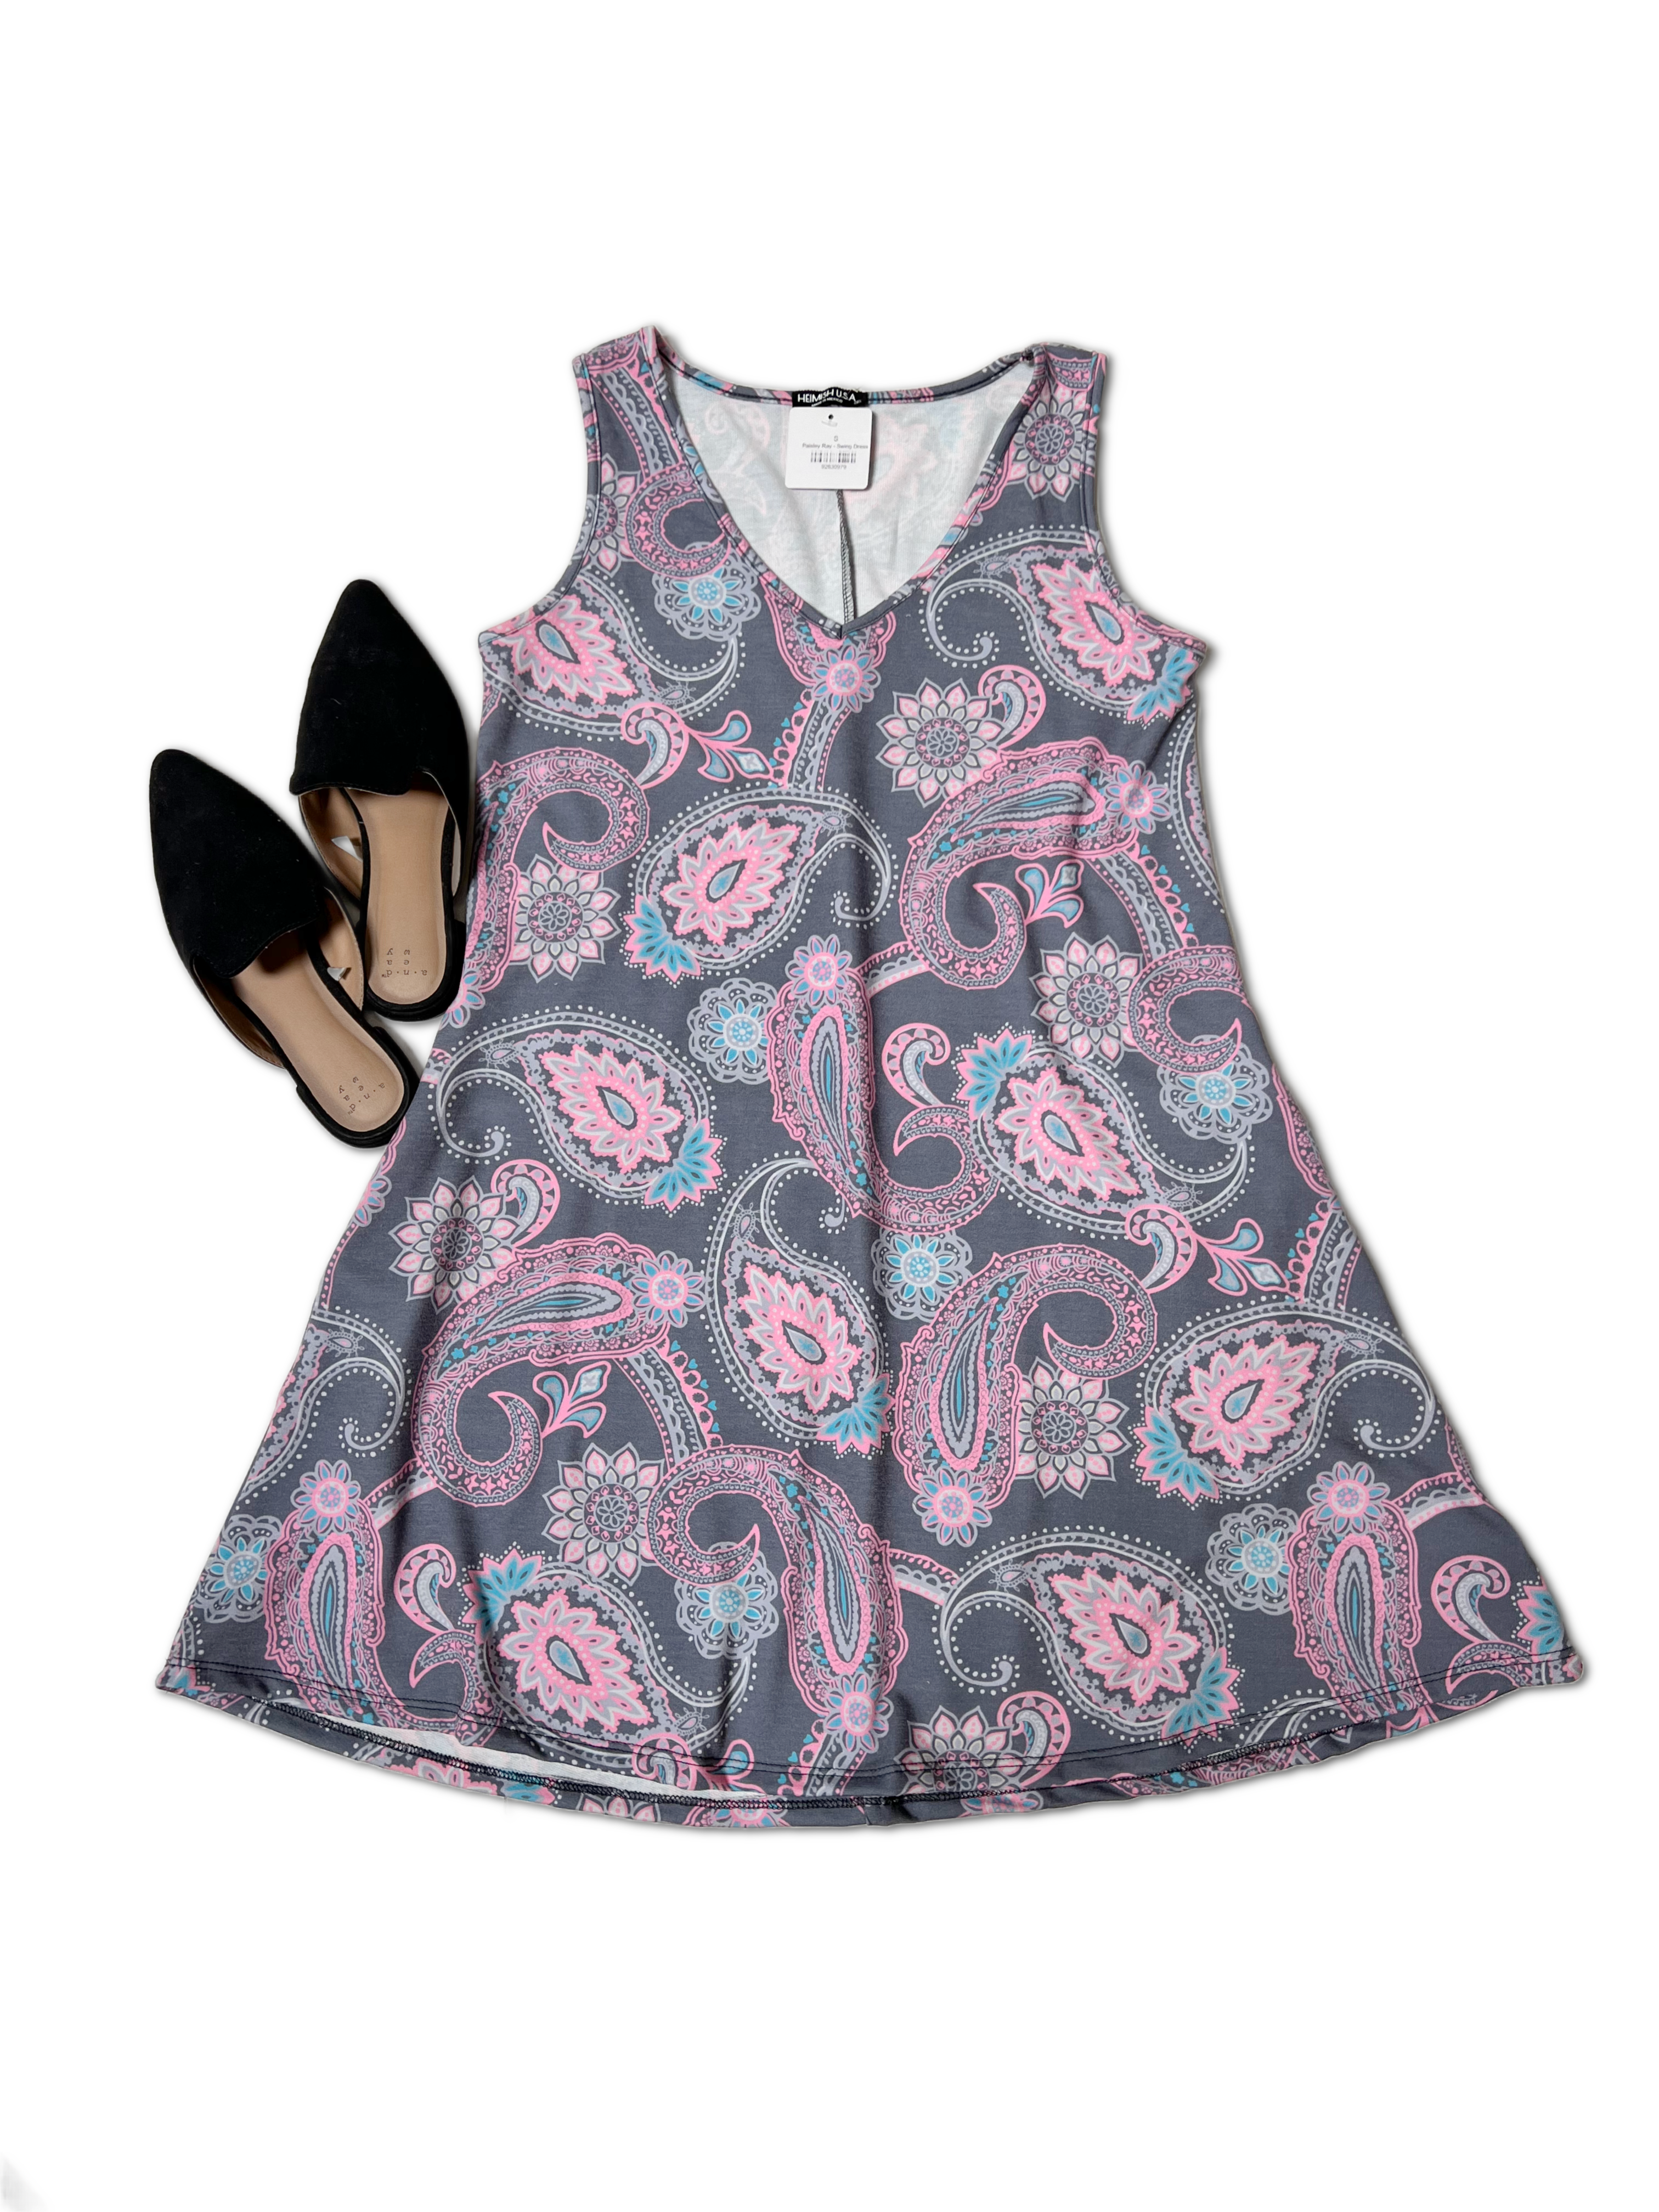 Paisley Ray - Swing Dress  Boutique Simplified   